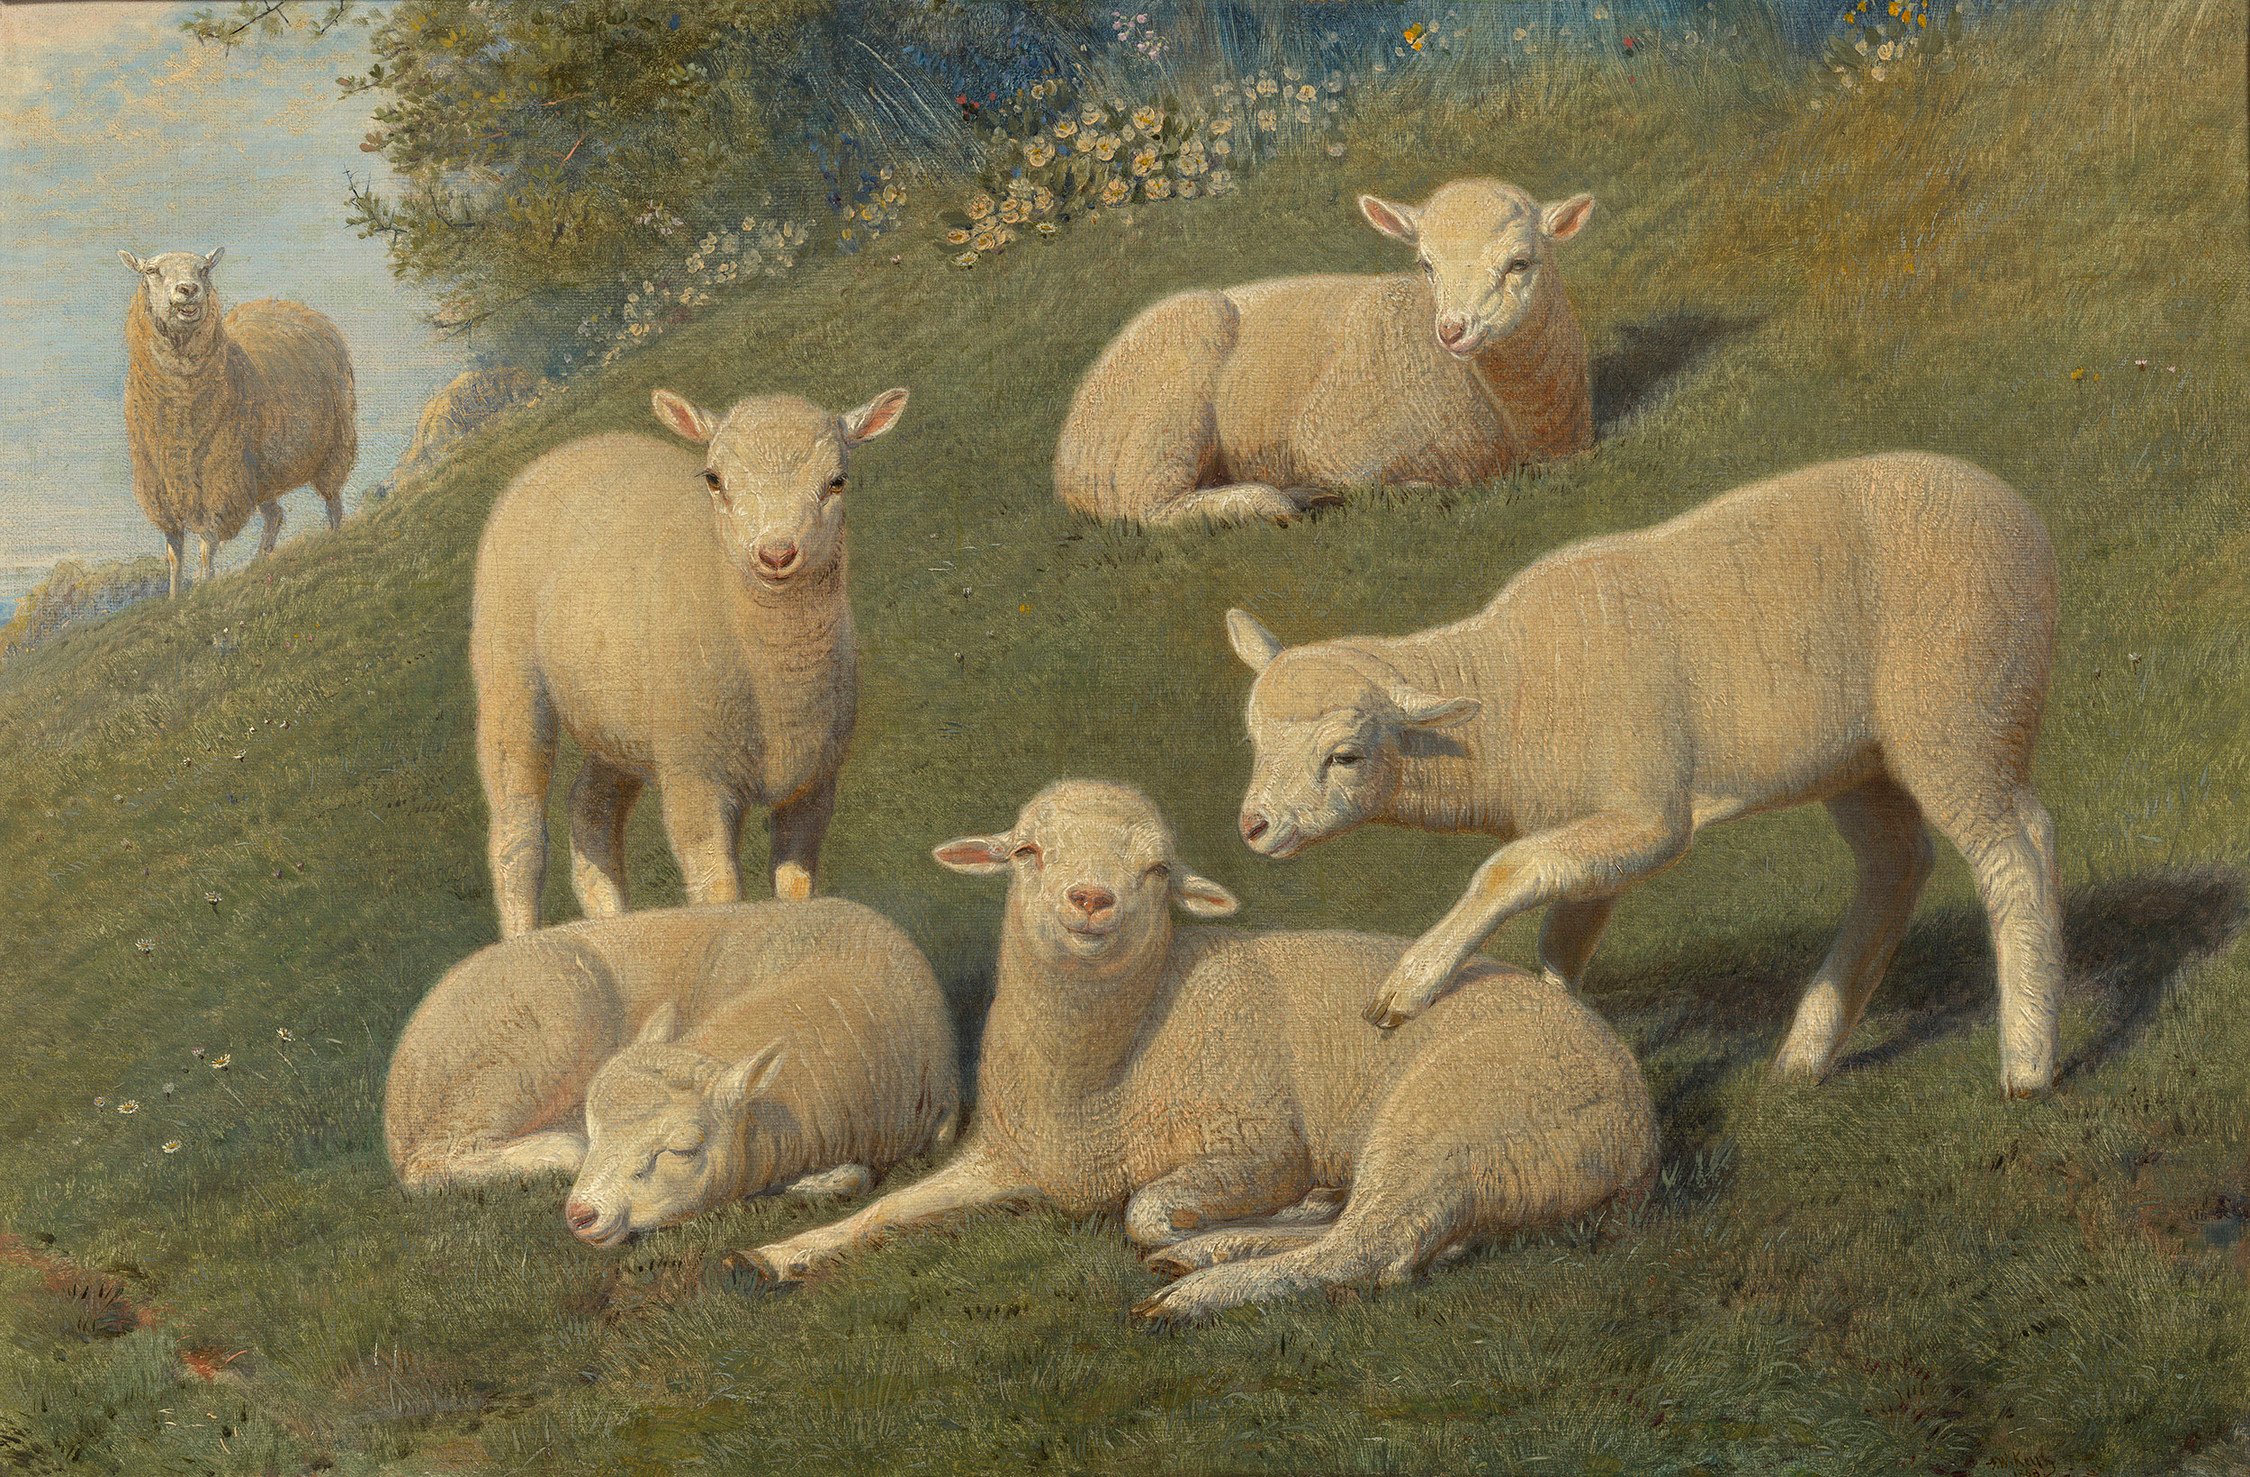 Keyl reported in a letter that he had learned from Sir Edwin Landseer that 'The Queen was quite delighted with my Lambs brought them herself with her own hands into his bedroom &ndash; thought it quite Preraphaelite'.
Signed and dated: F.W. Keyl / 1868.